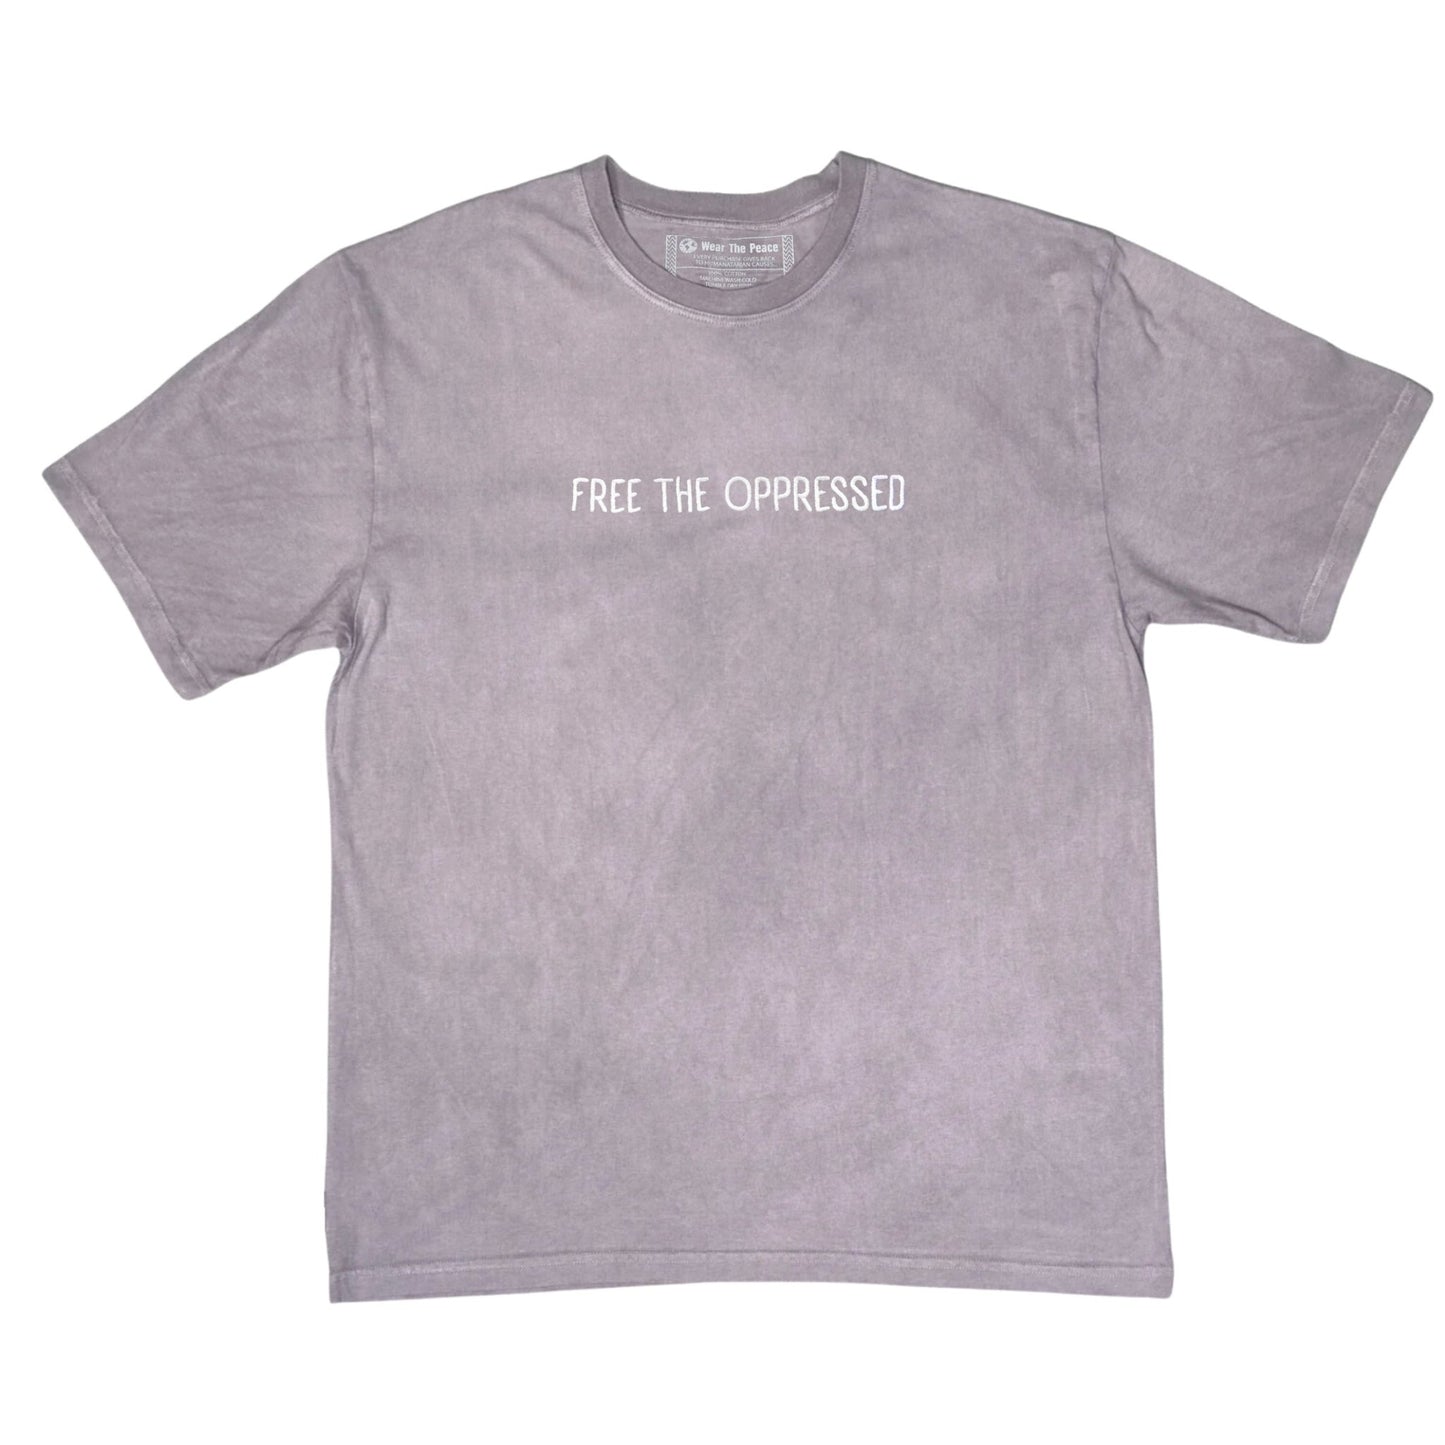 Free The Oppressed Tee Wear The Peace Short Sleeves S